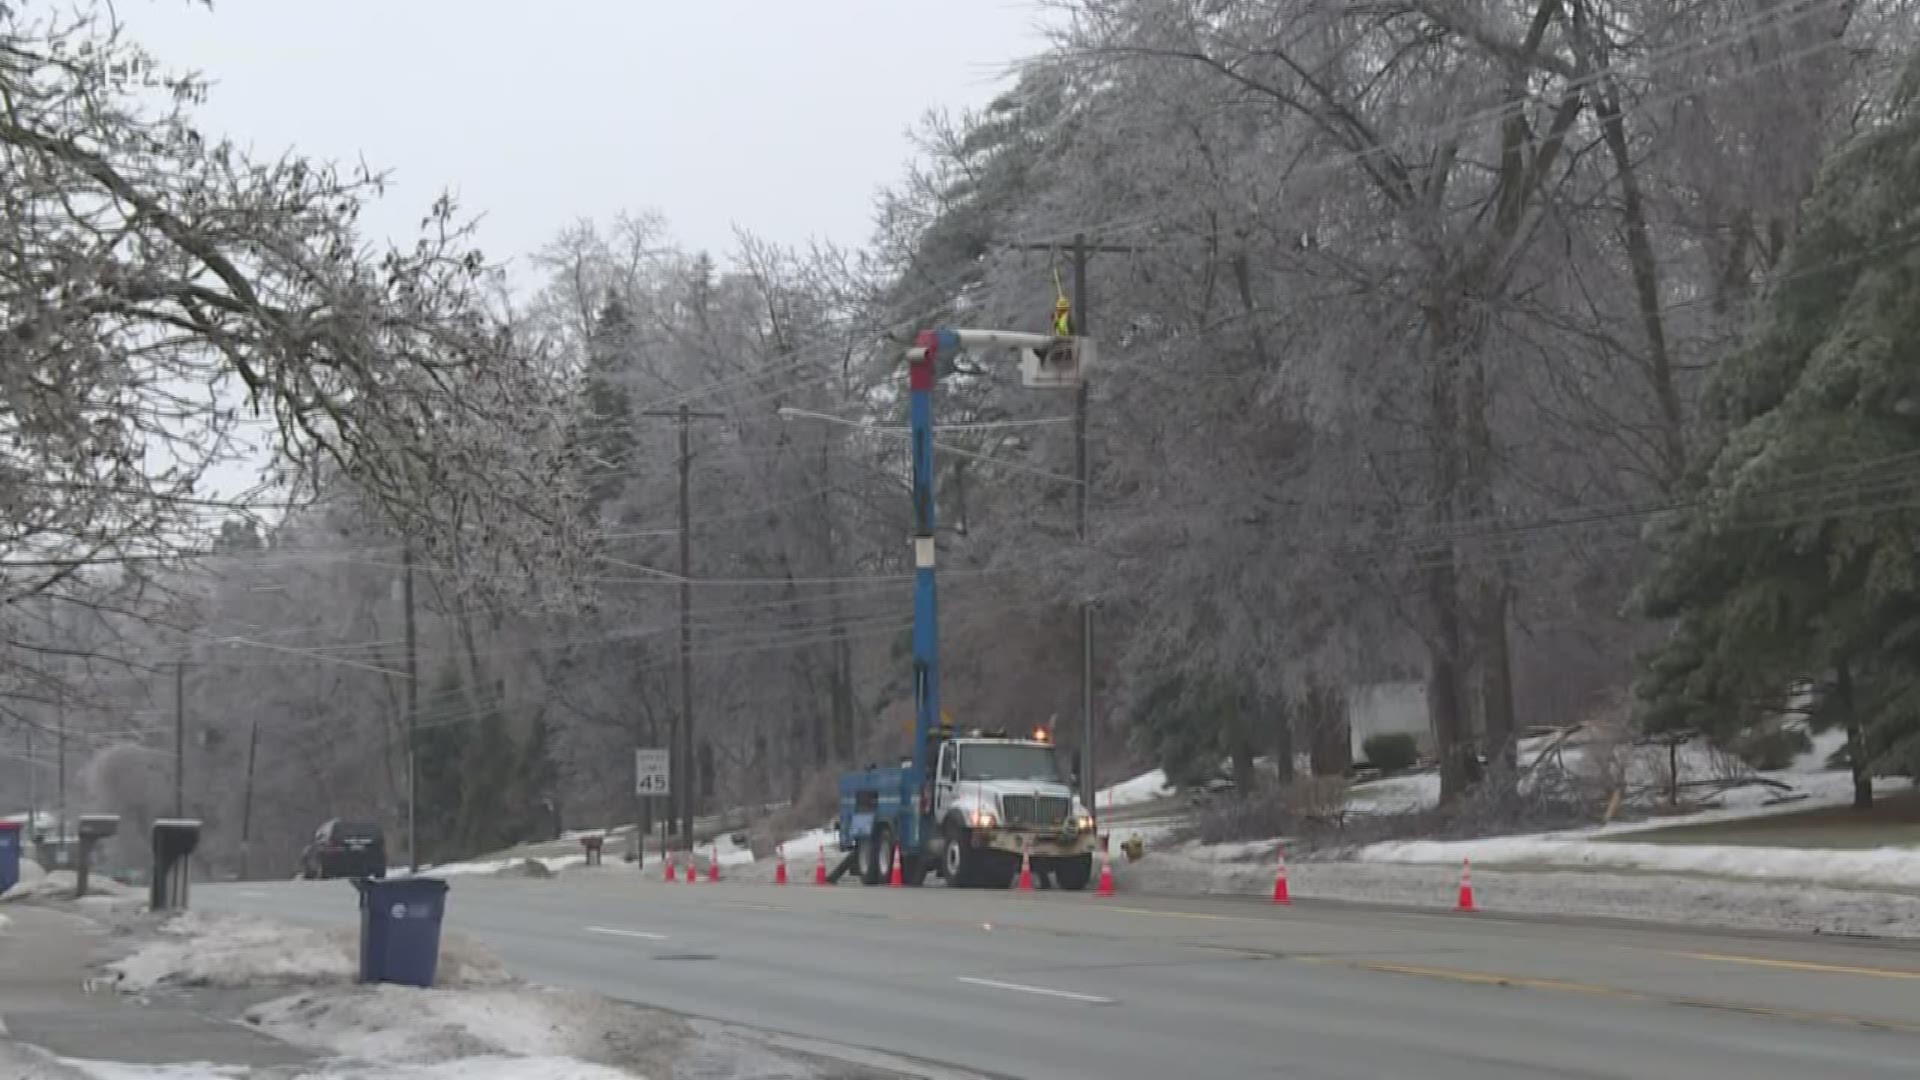 Residents, power companies and road crews are bracing themselves for a winter storm headed for the region.